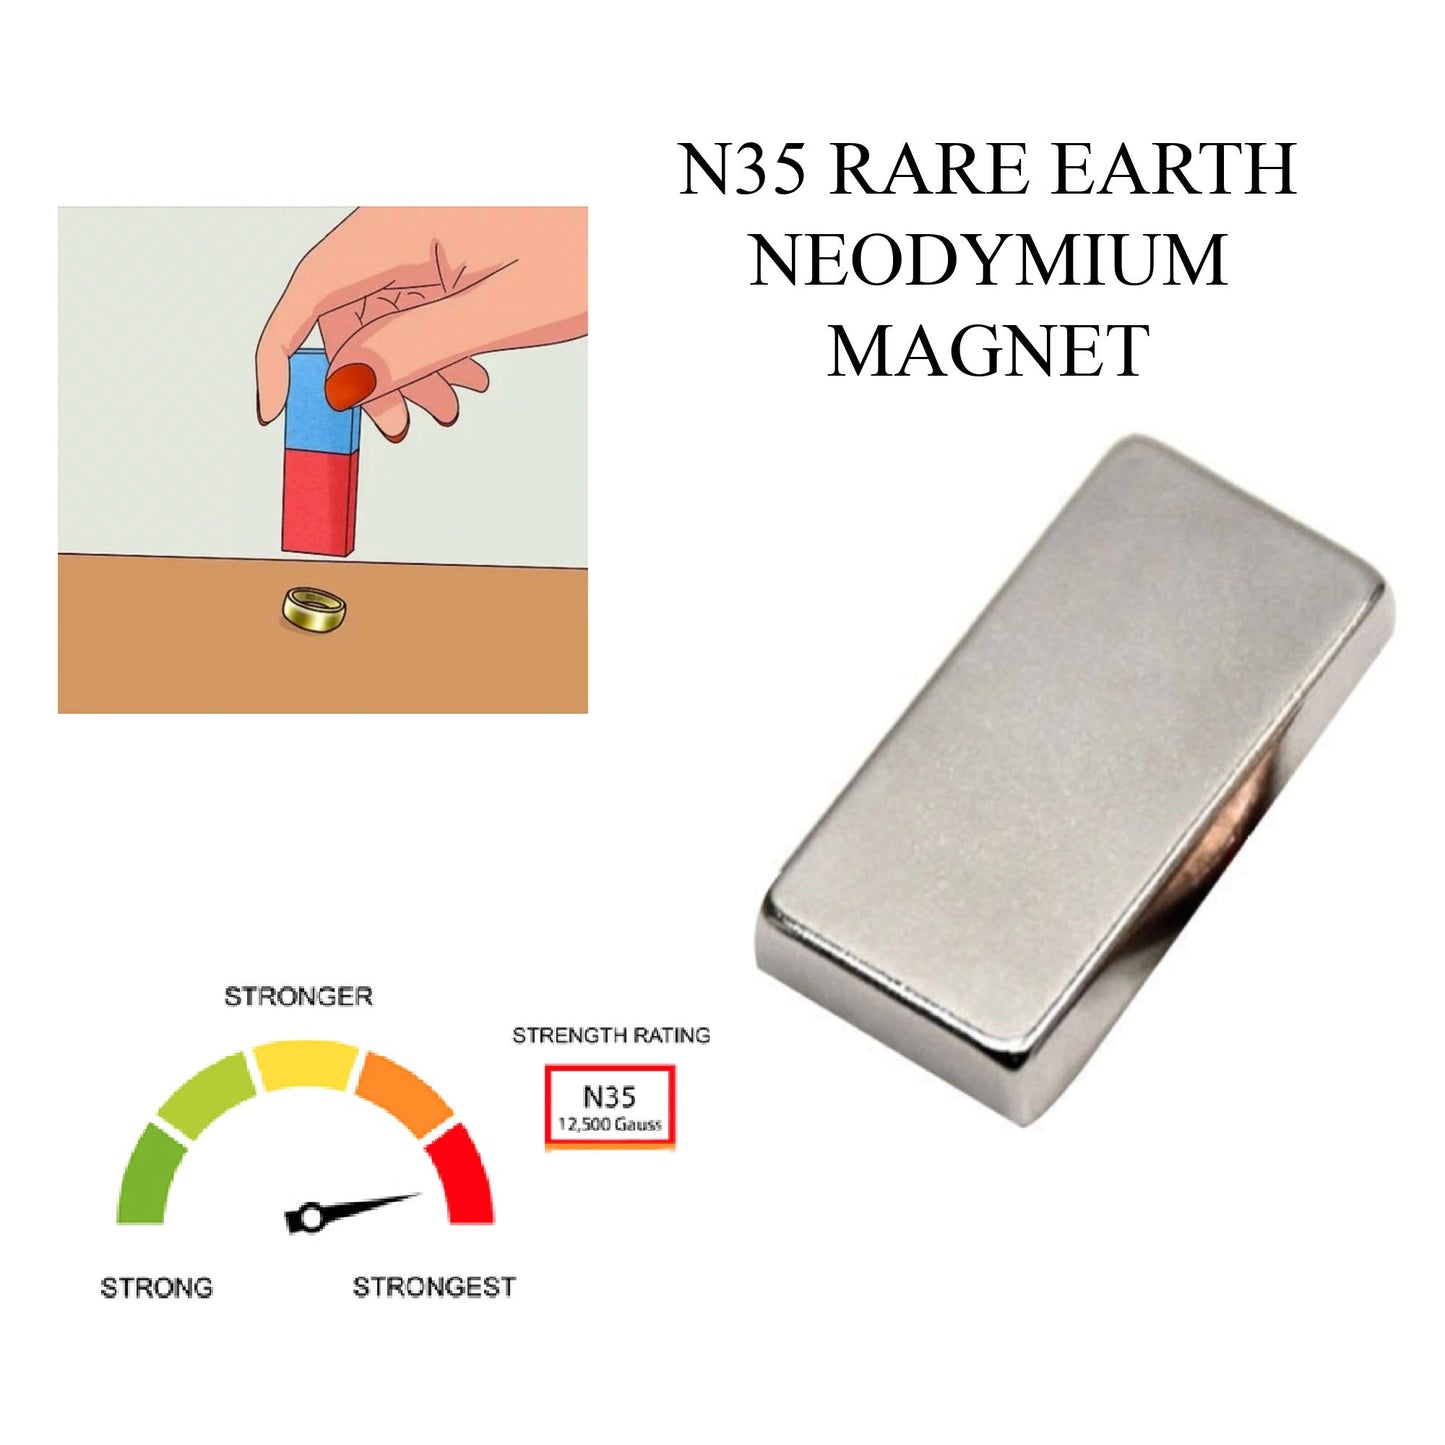 JSP Rare Earth Magnet Neodymium N35 for Precious Metals Gold Jewelry Testing Scrap Bars Fake Coins Tester 999 Ring, Women's, Size: One size, Grey Type